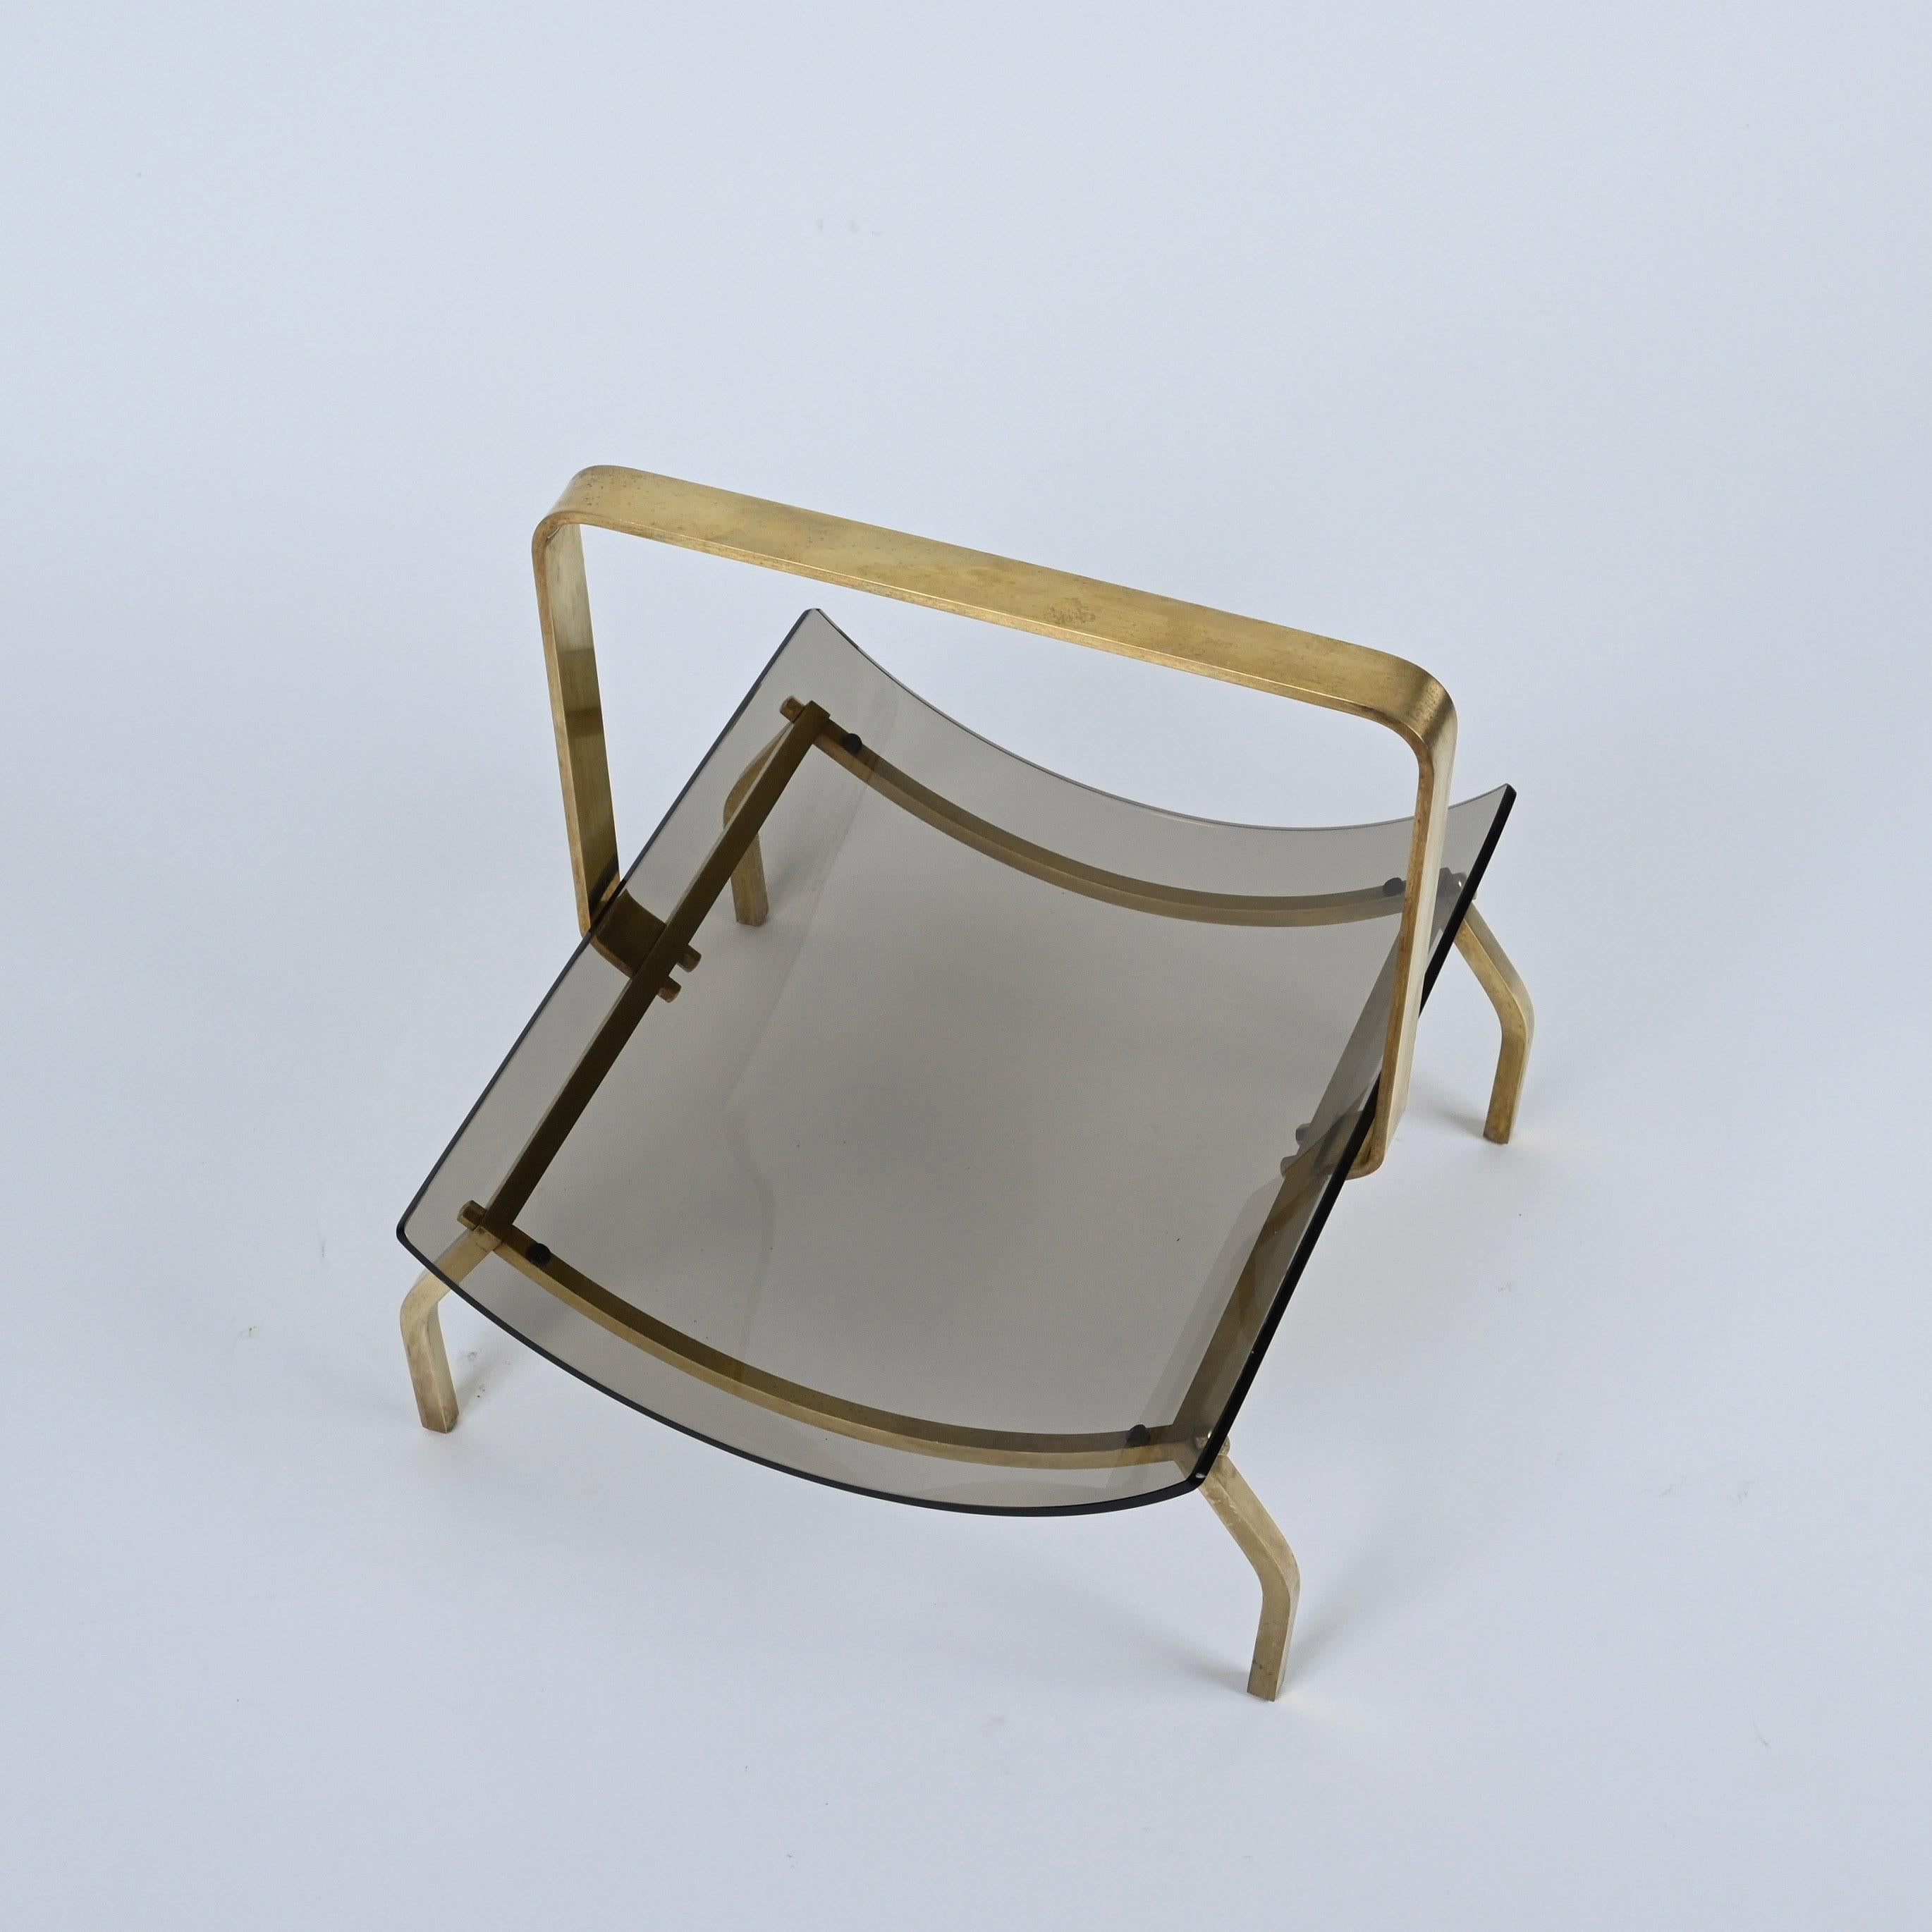 Midcentury Fontana Arte Brass and Smoked Glass Magazine Rack Stand, 1960s, Italy For Sale 5